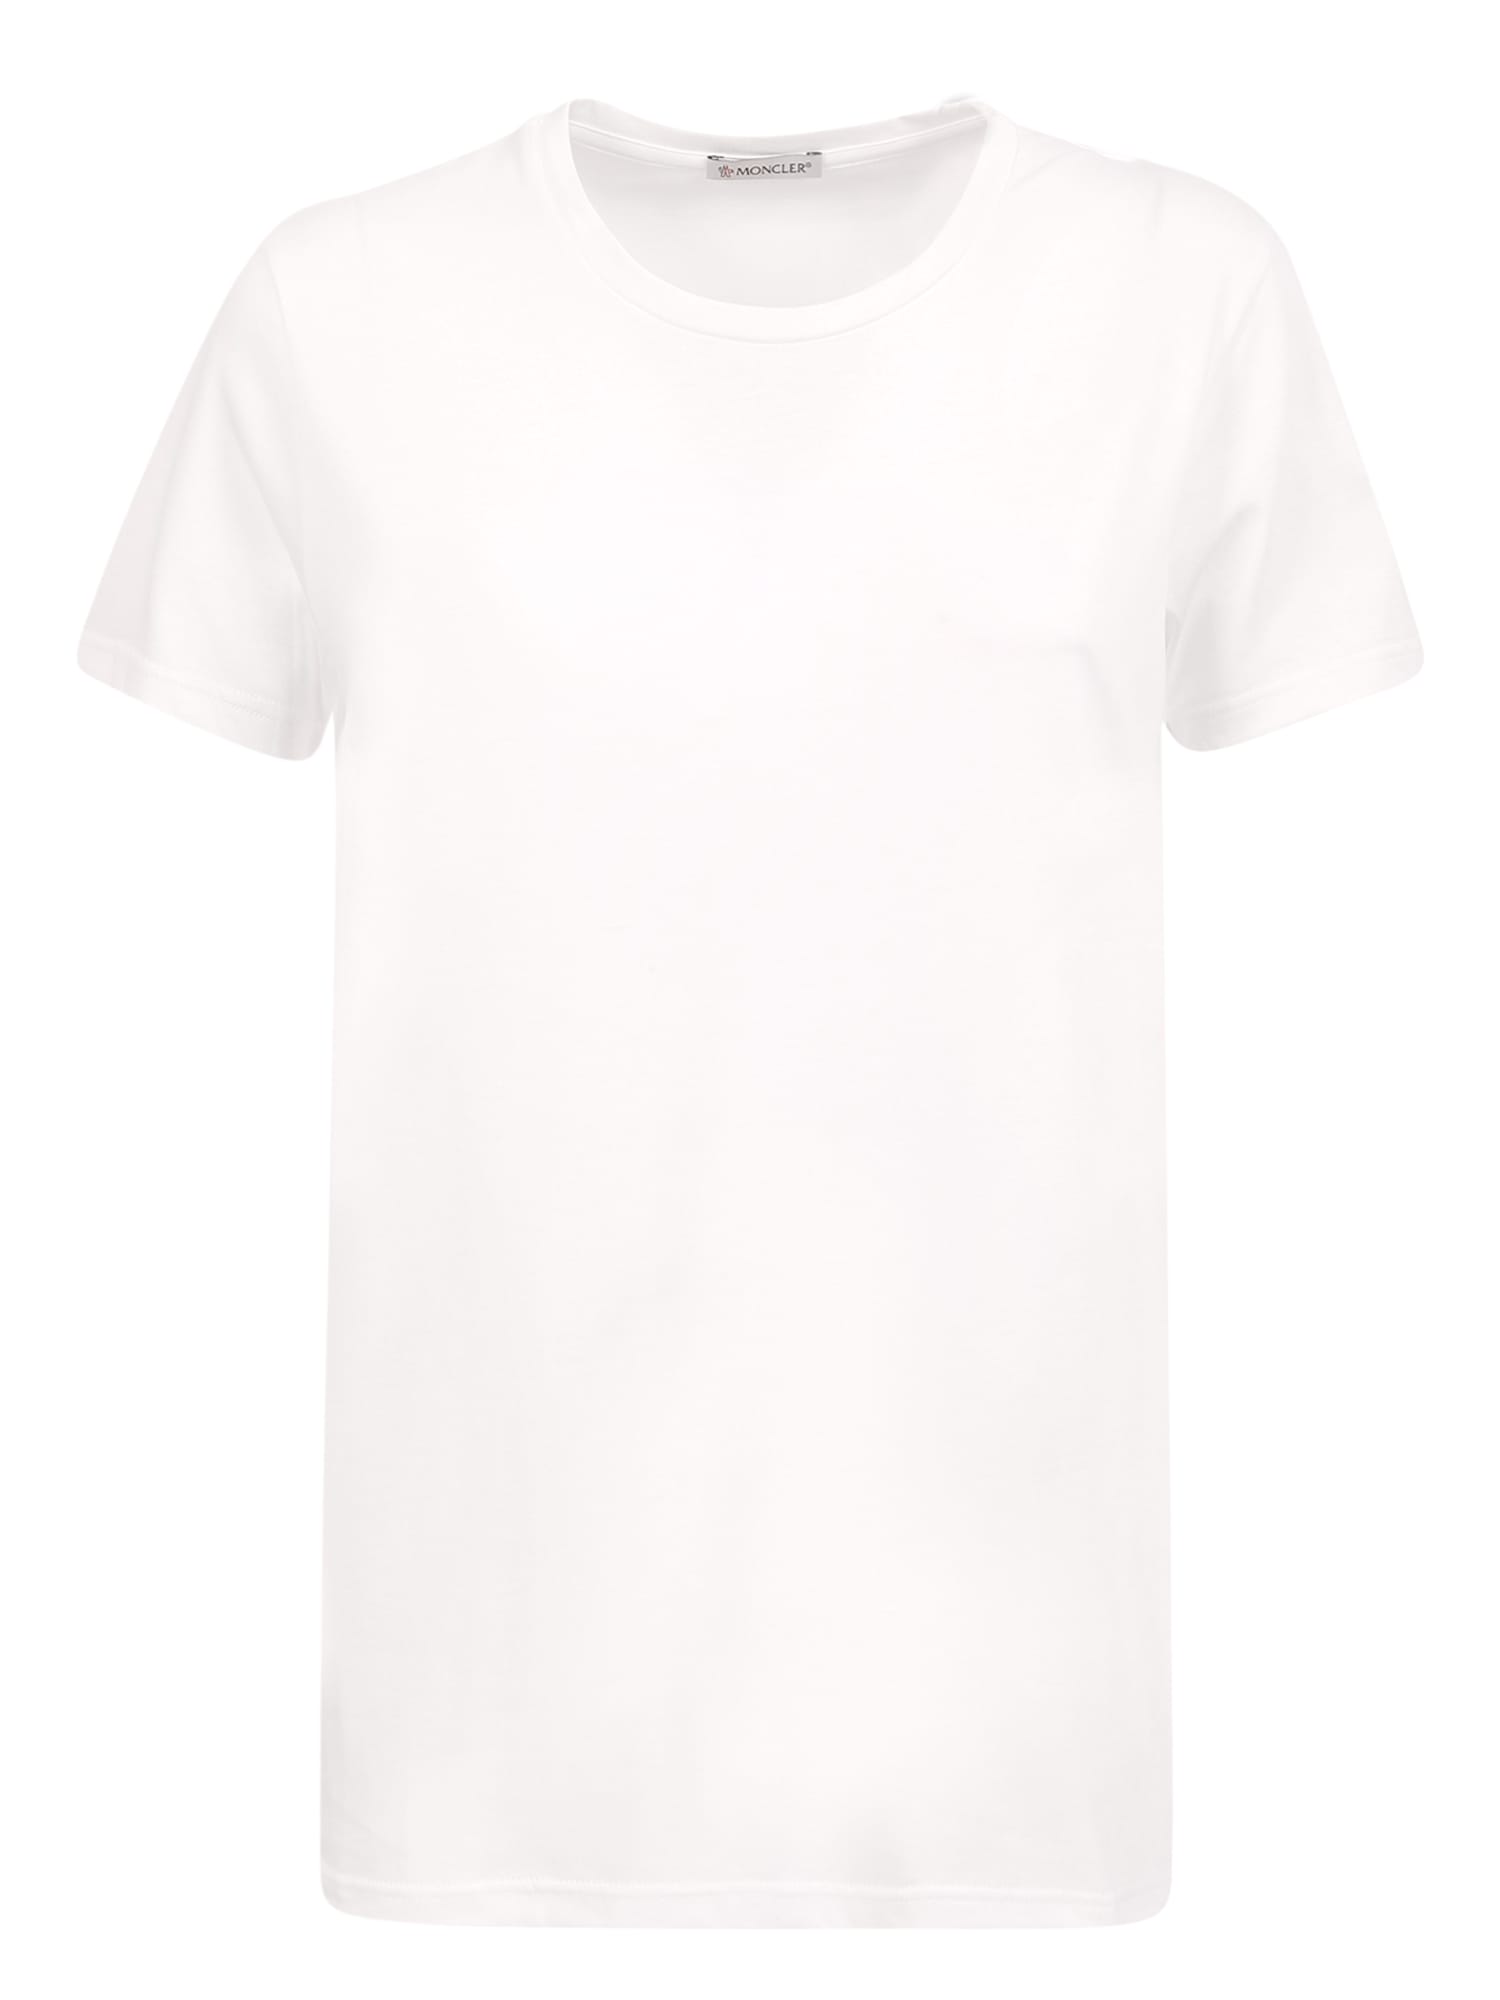 MONCLER BASIC T-SHIRT ENRICHED BY THE ICONIC LOGO BY MONCLER